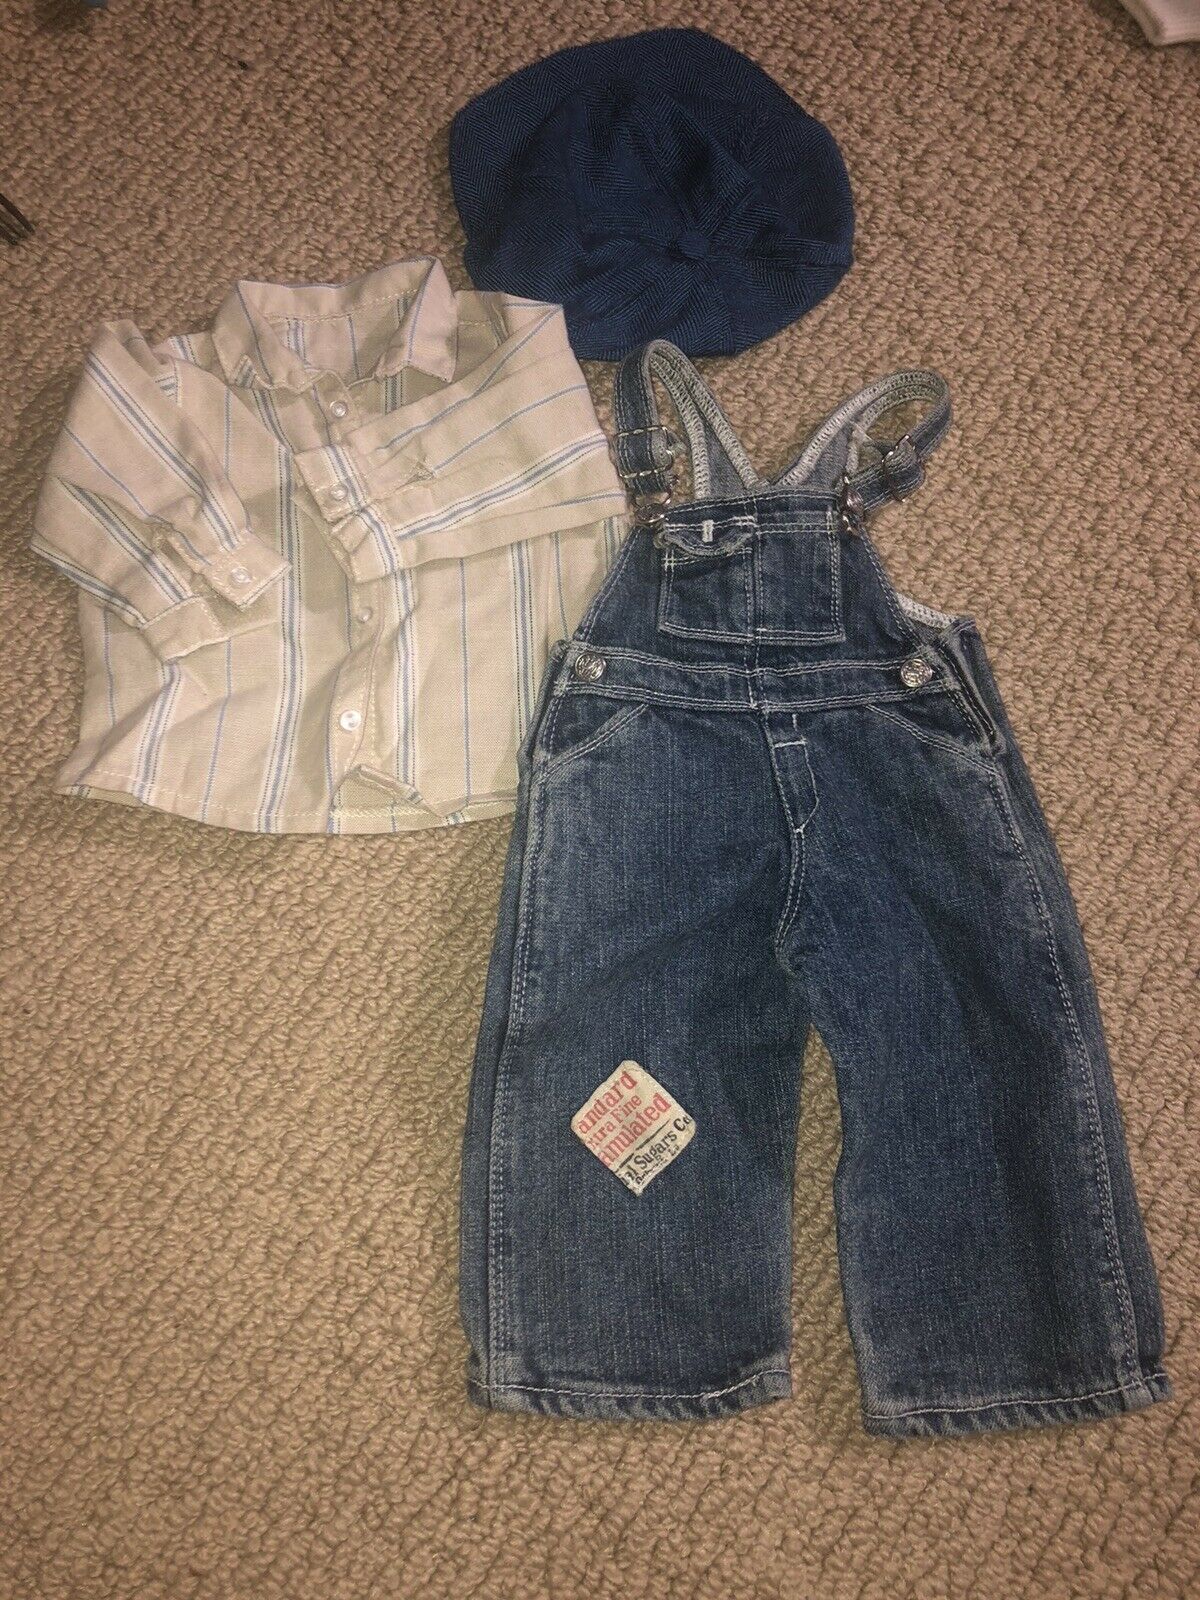 American Girl Doll Kit’s Overalls Outfit - Used